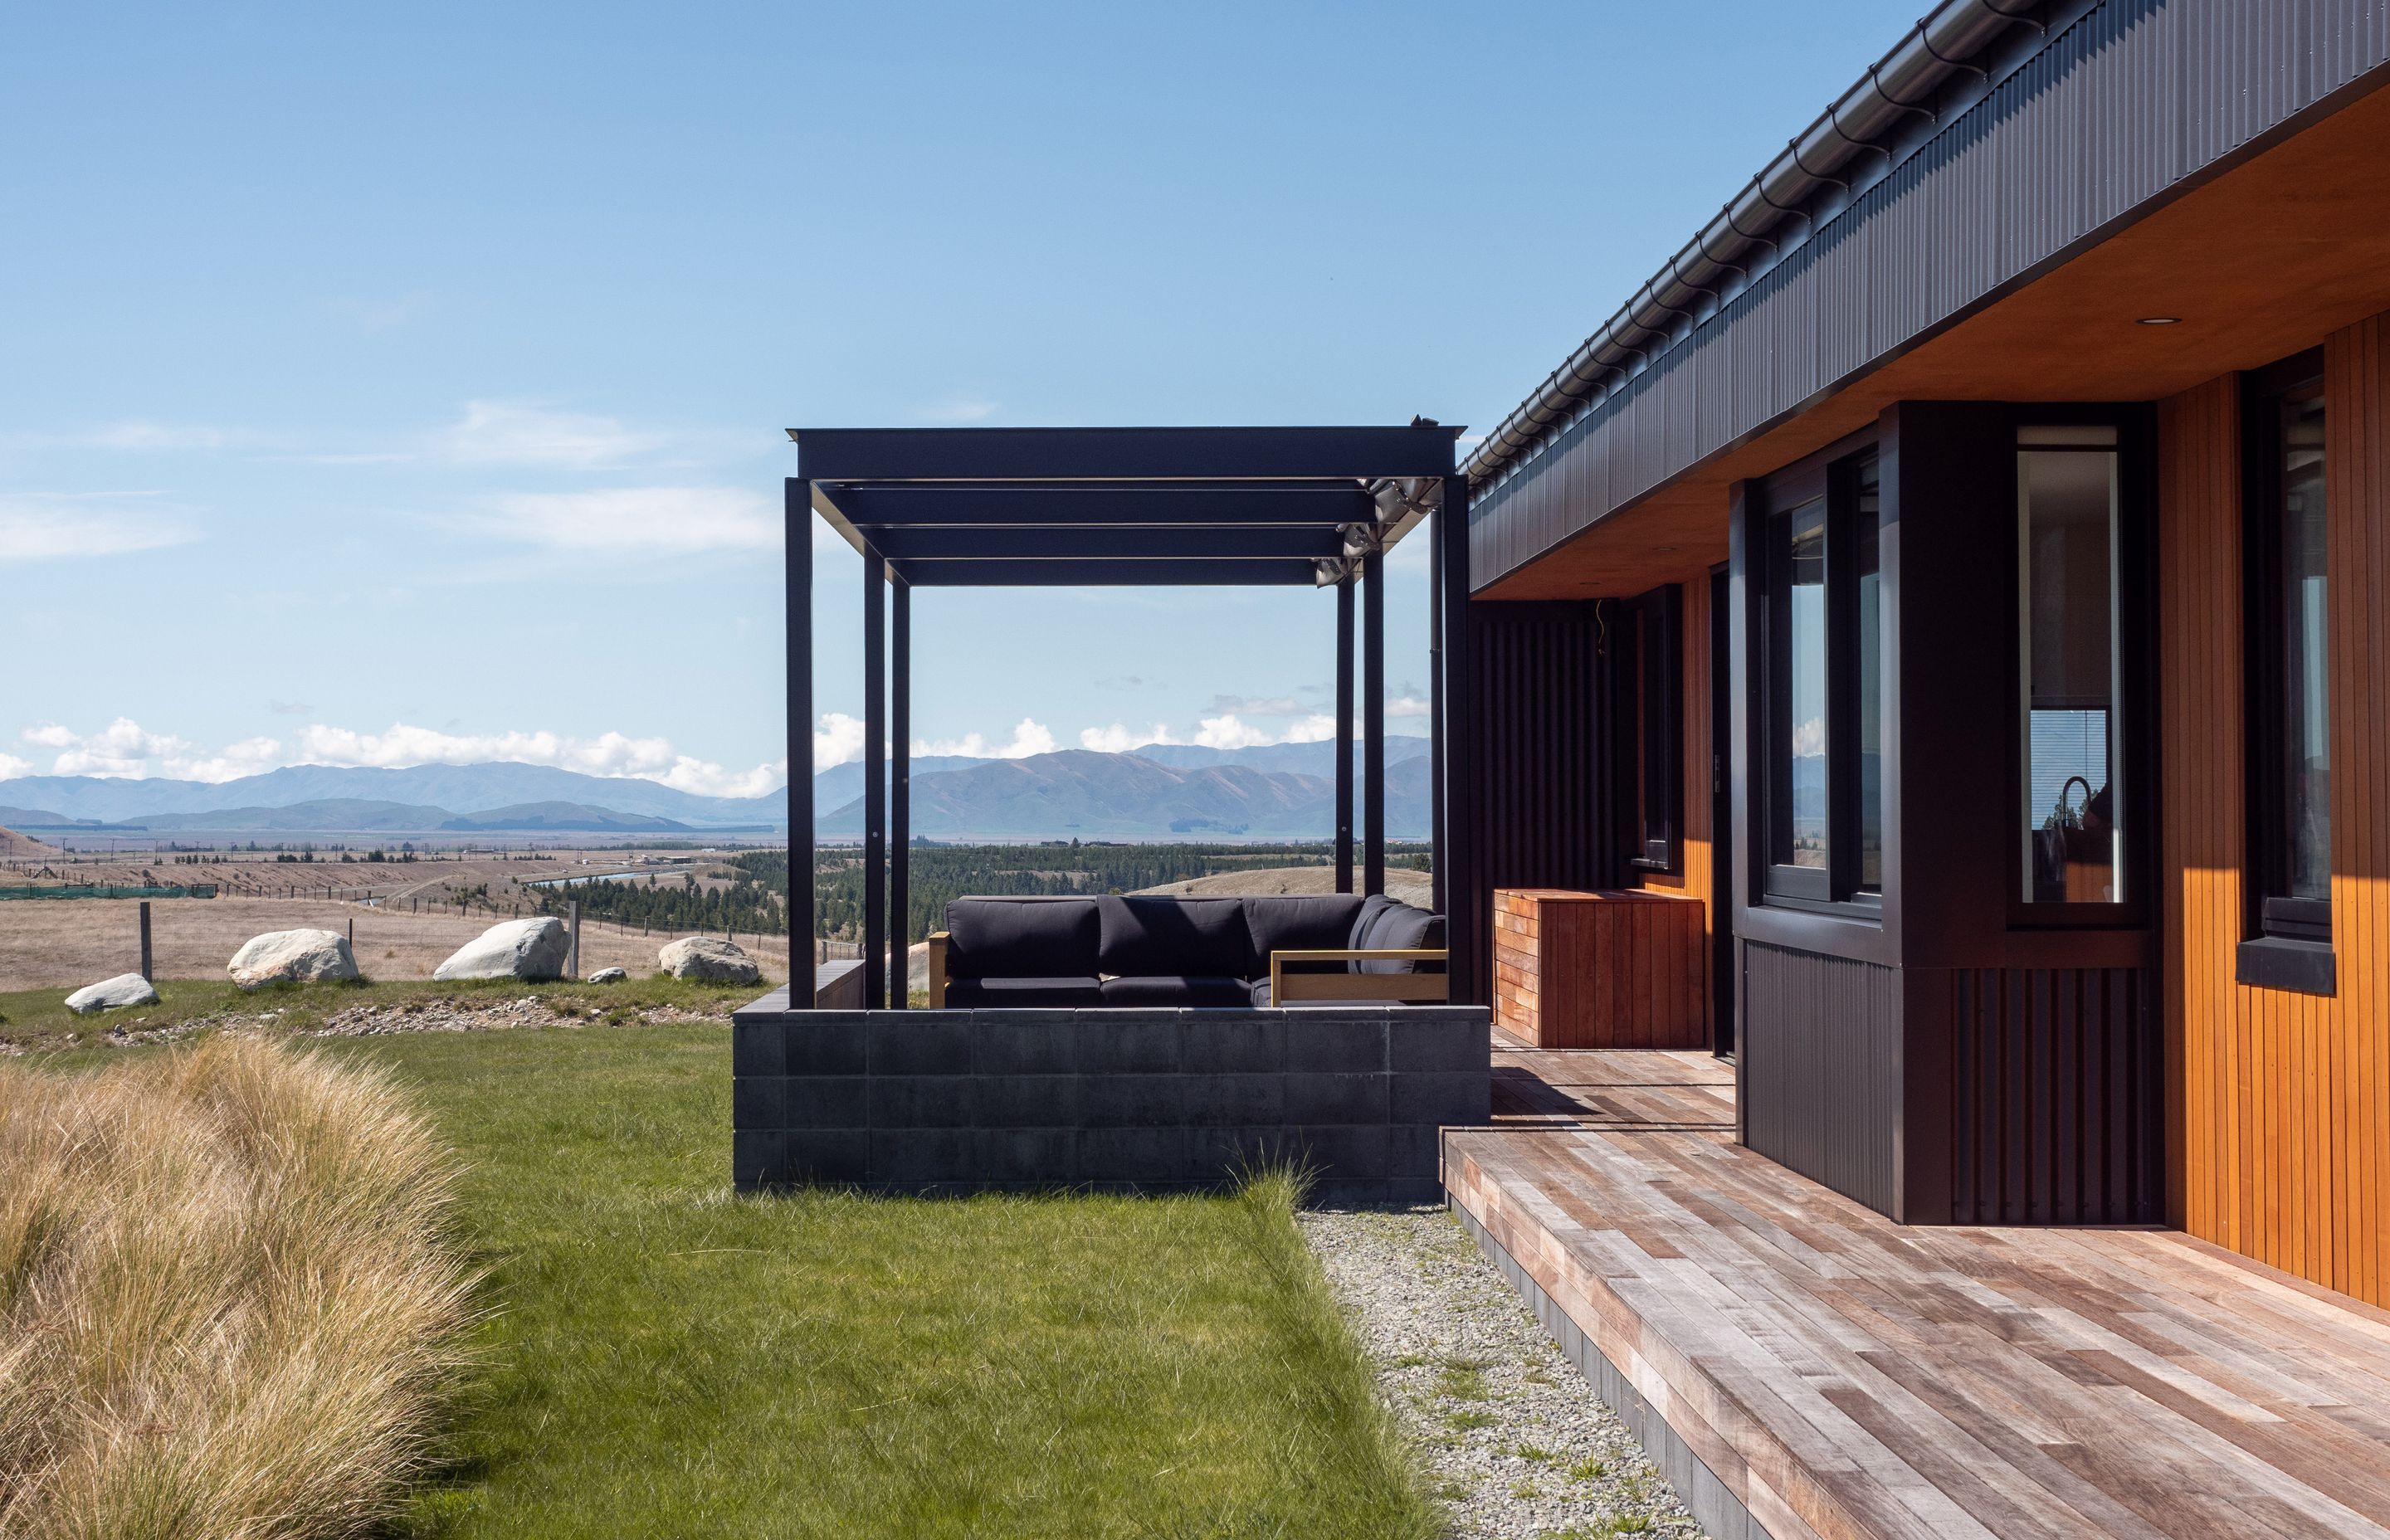 There are multiple options for outdoor living spaces. “They can be in and experience the landscape without just having one key area, which in uncertain conditions you couldn't use.”